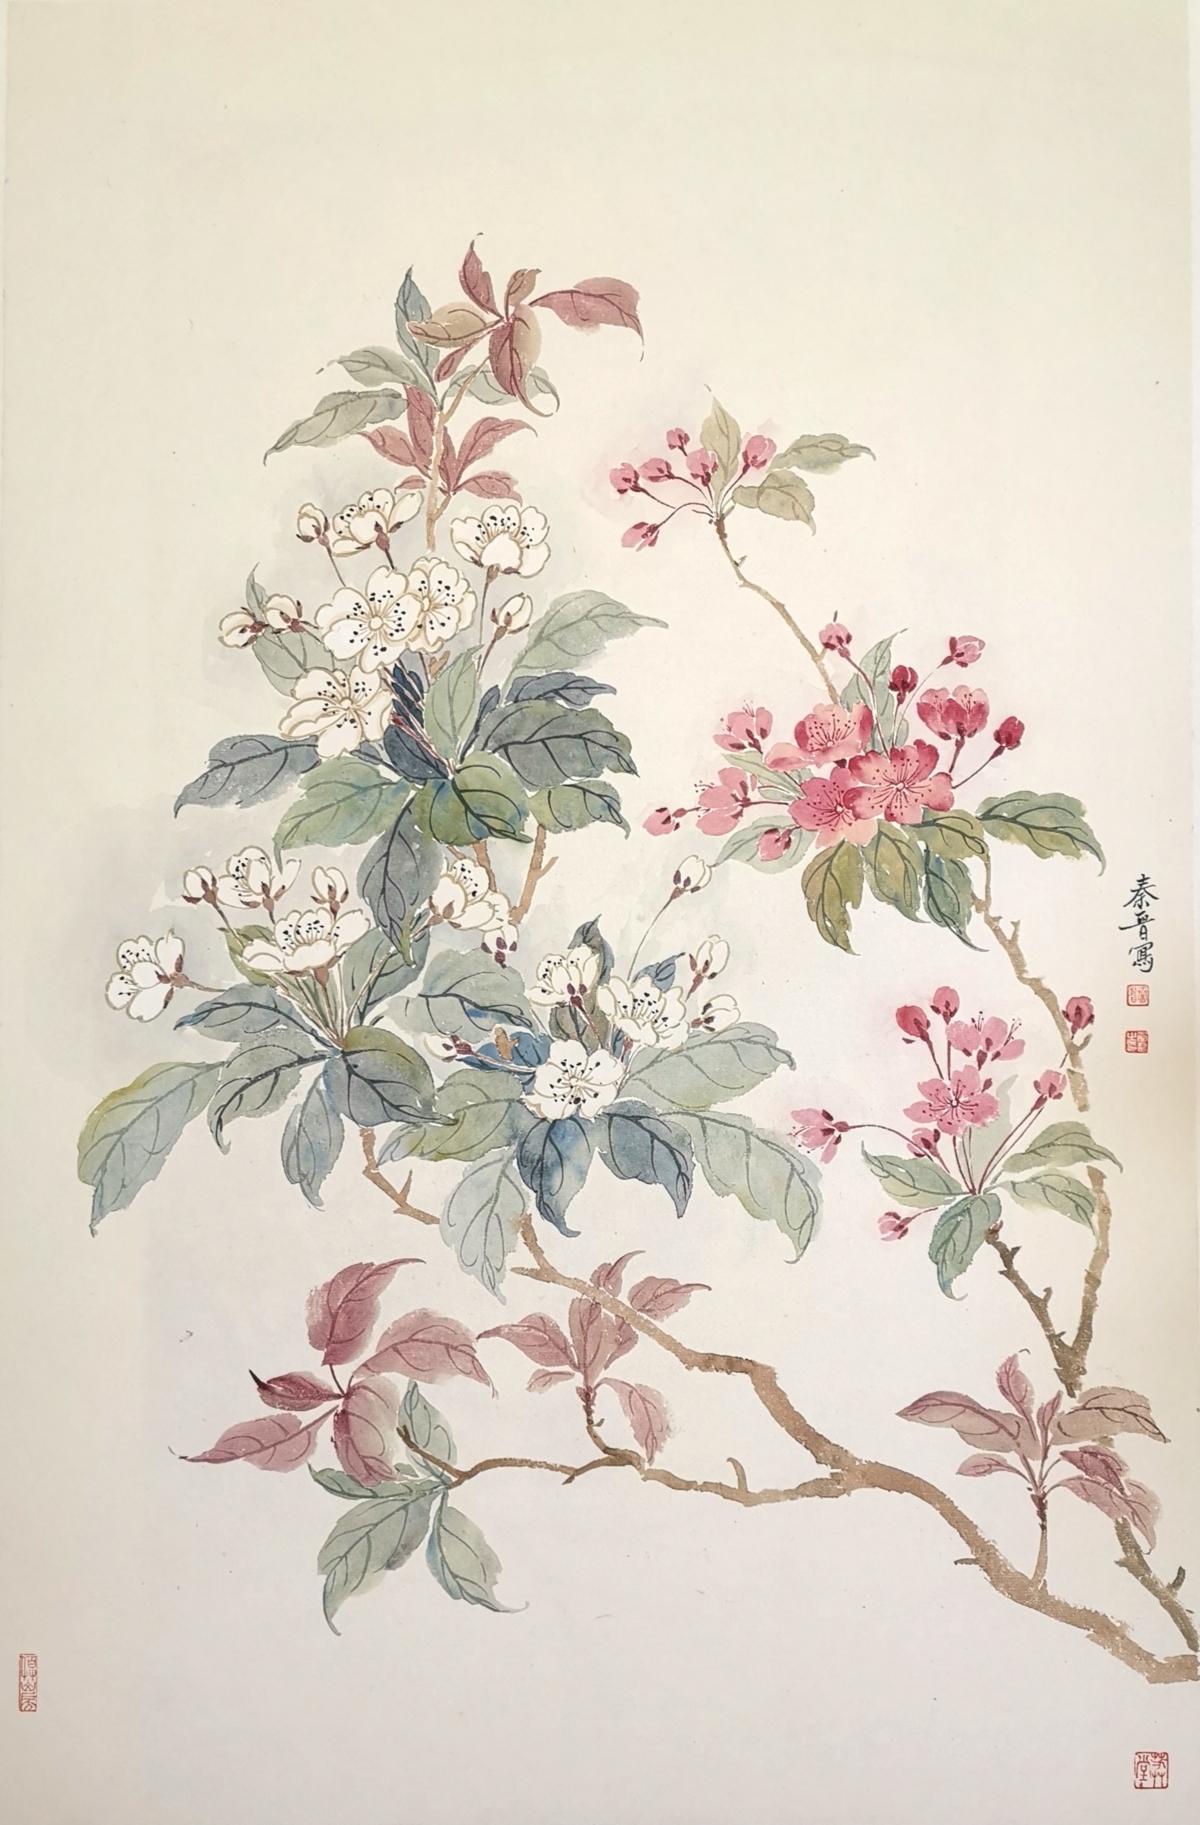 Qinjin Song (宋秦晋), Land of Peach Blossoms (桃花源记), ink and colour on rice paper 纸本设色, 68 x 45 cm (26.72x 17.68 inches), 2022